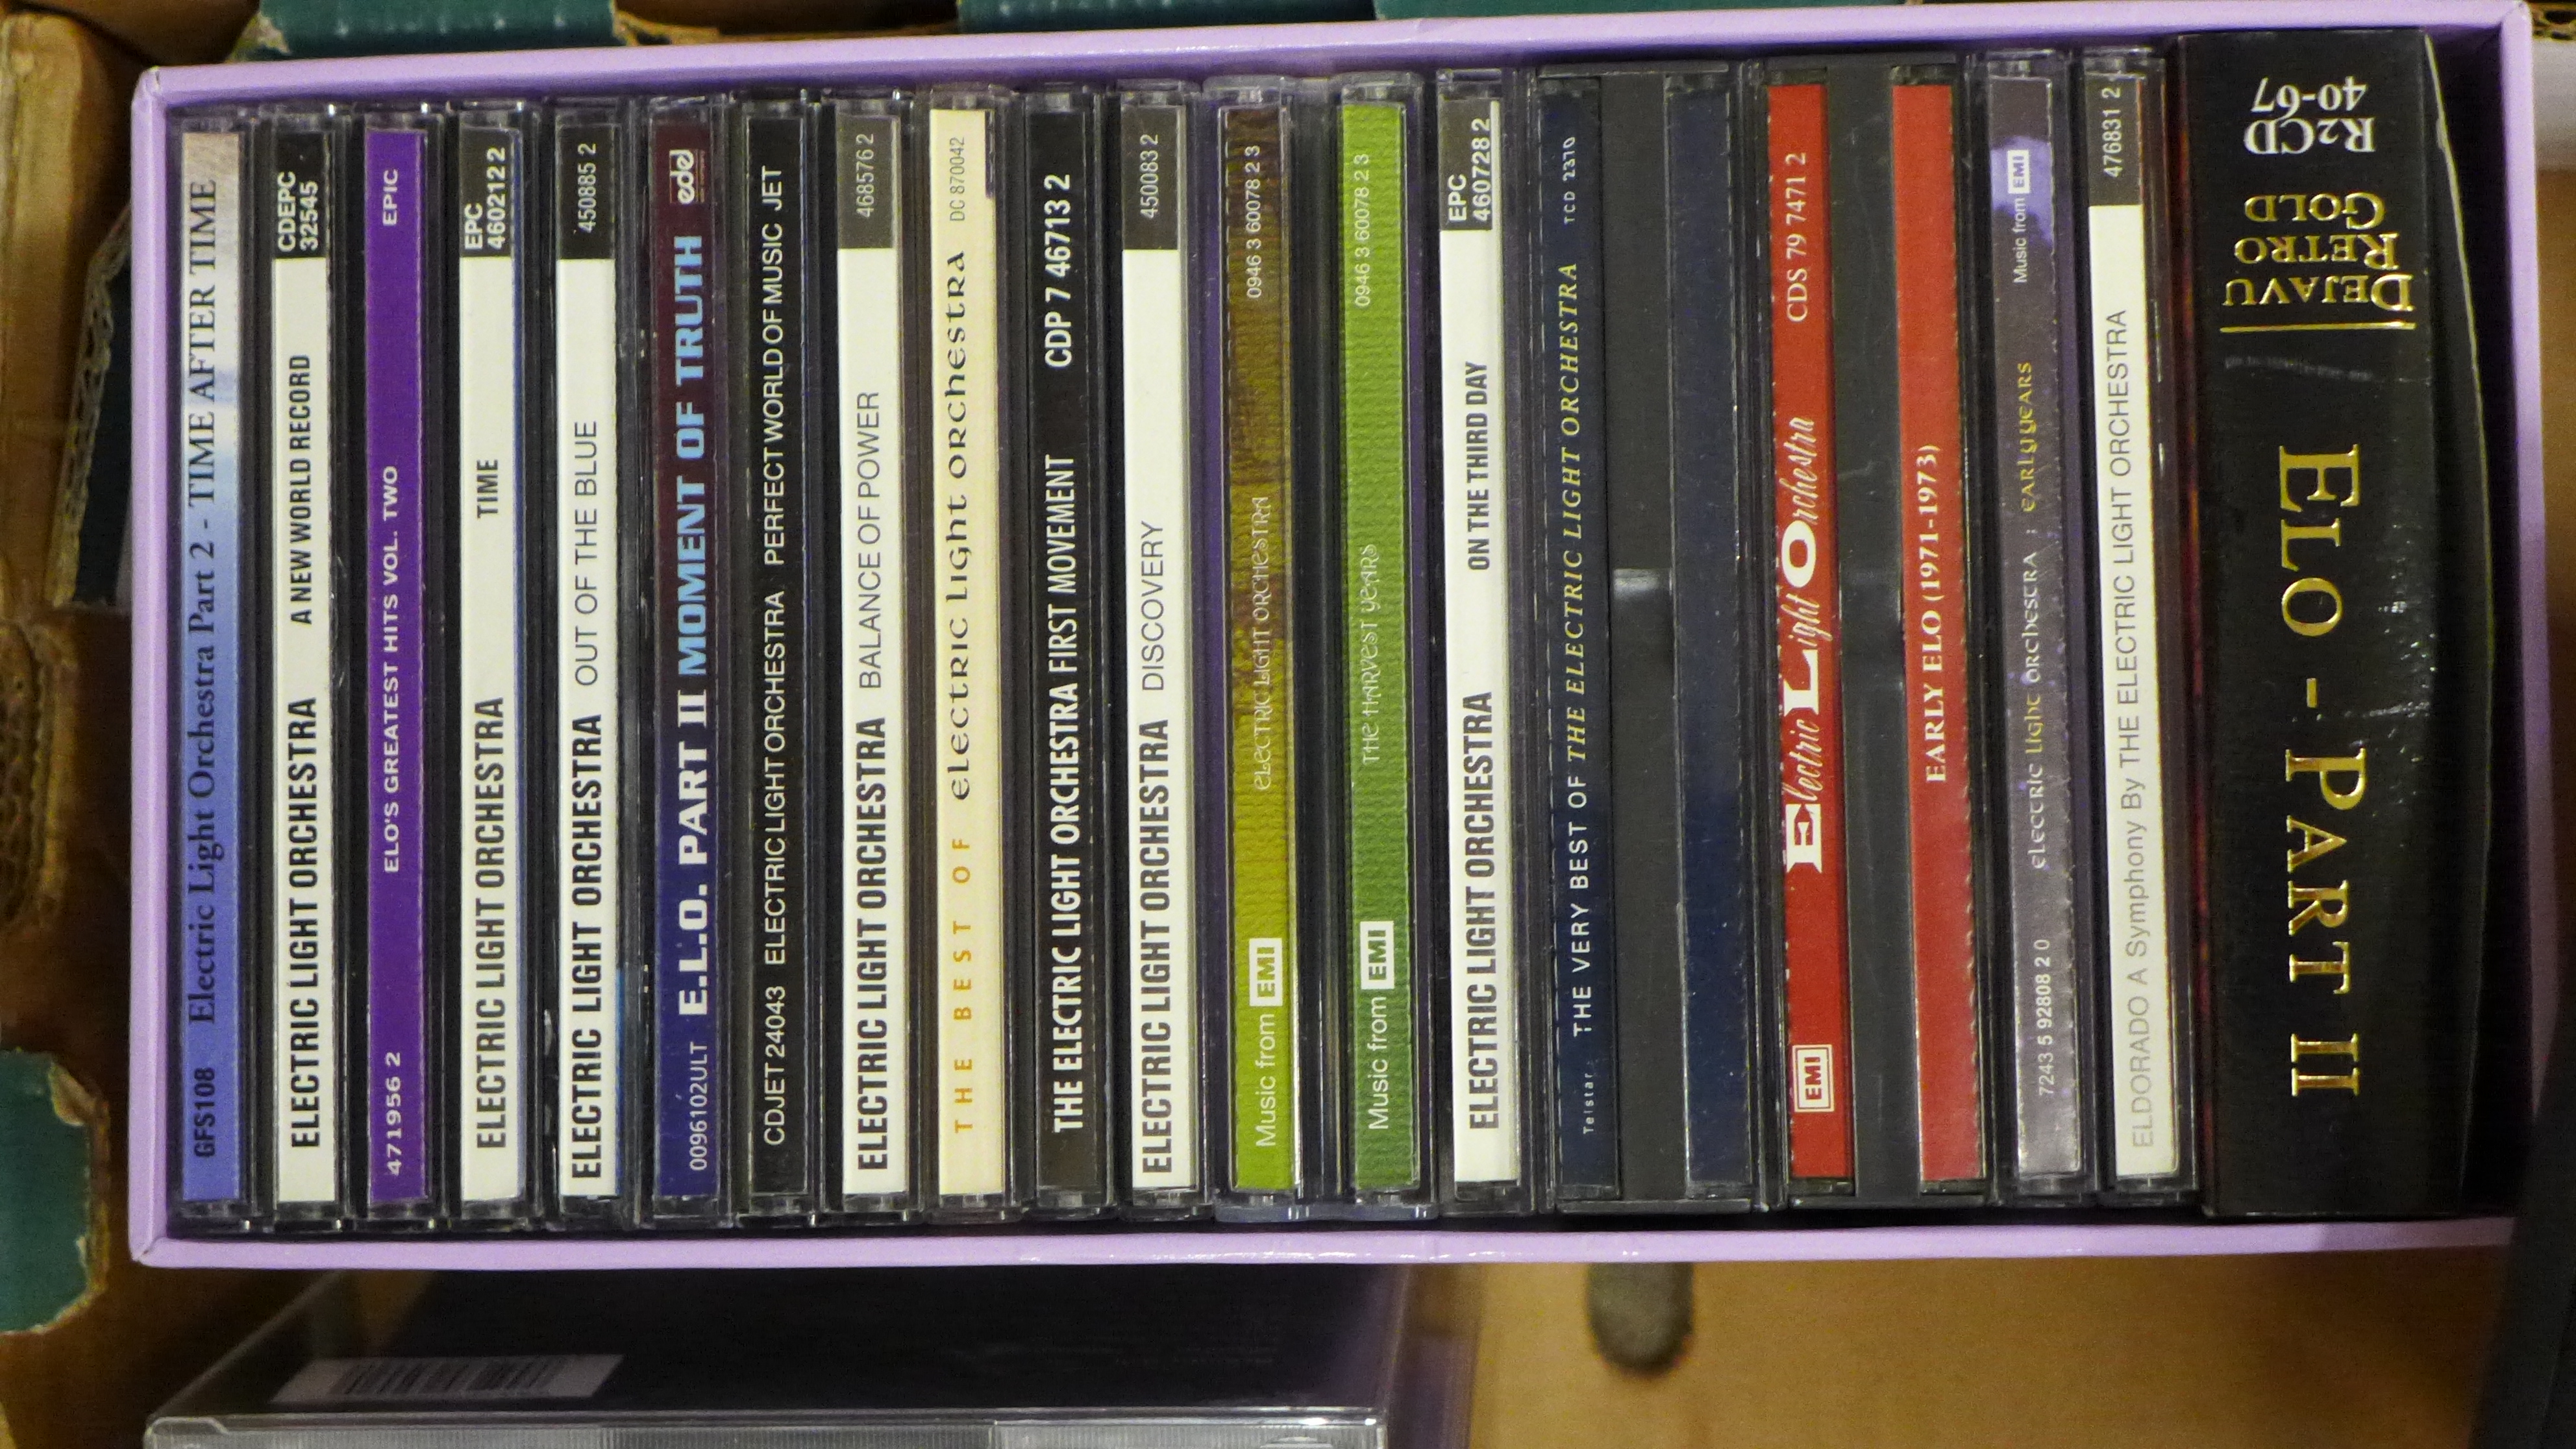 ELO CDs, mixed LP records including Bryan Ferry, Dire Straits, UB40, Moody Blues, Queen, plus - Image 2 of 4